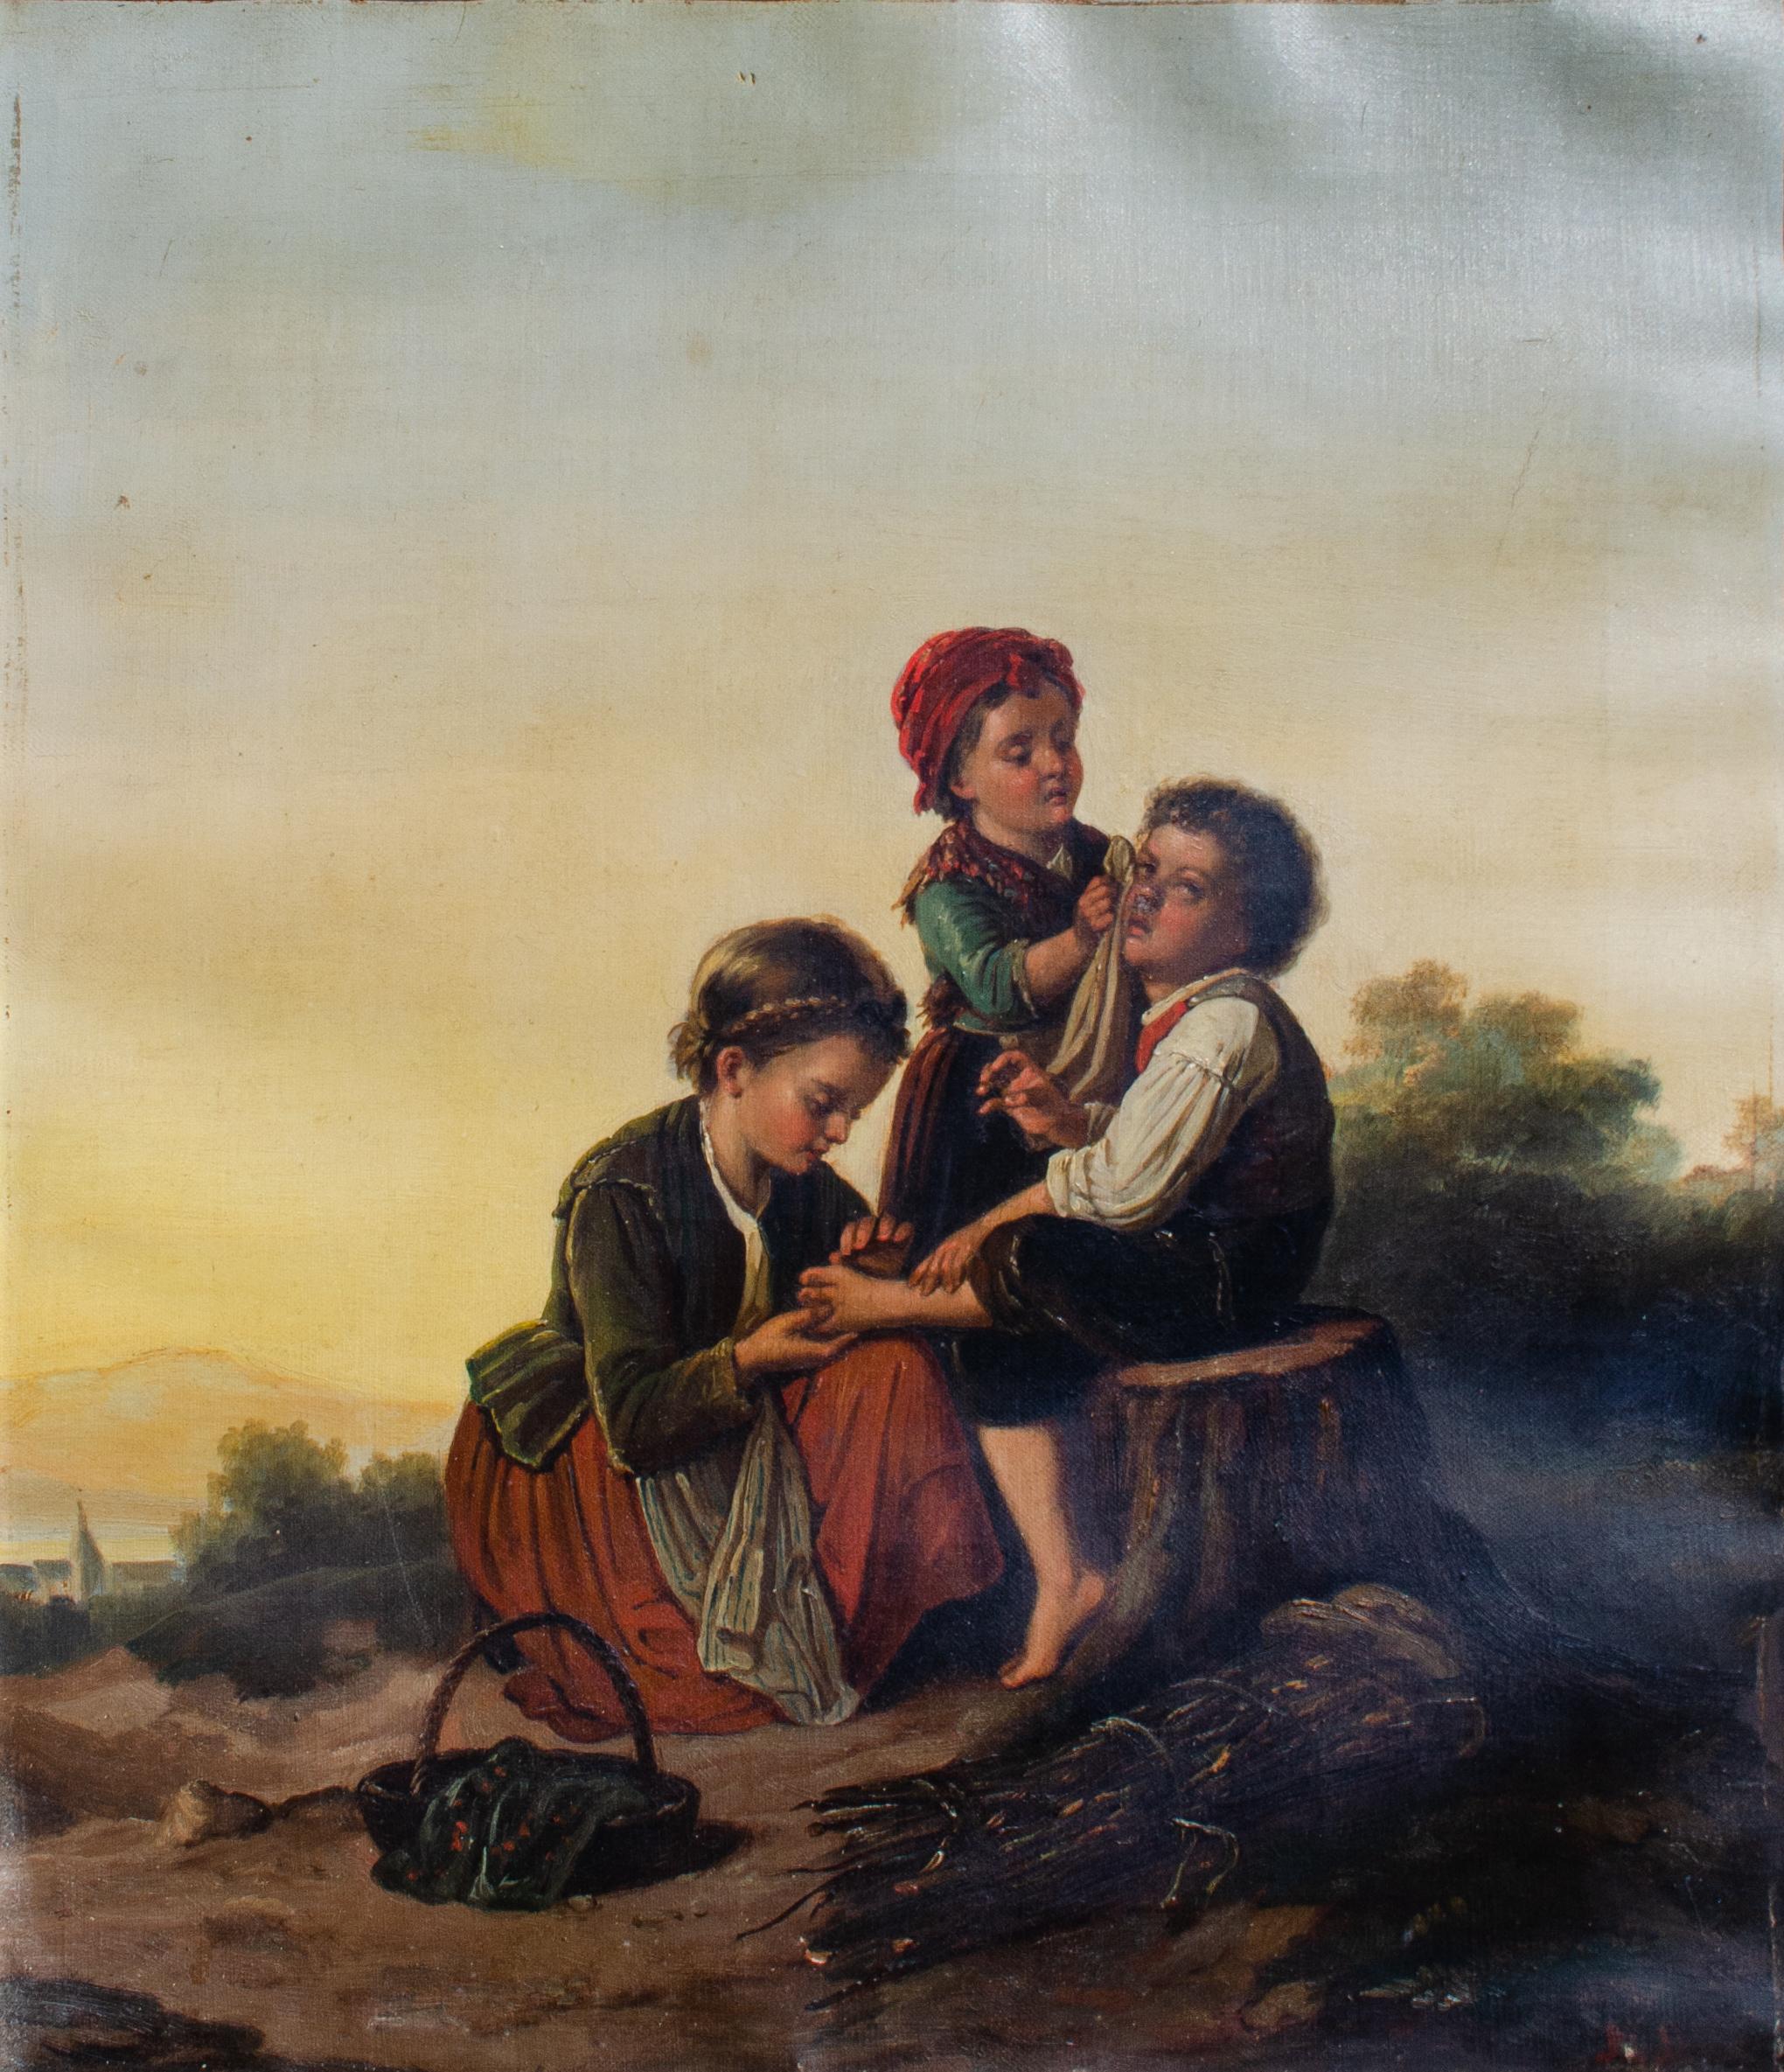 Two Italian School Portraits of Children, c. 1800s - Painting by Unknown